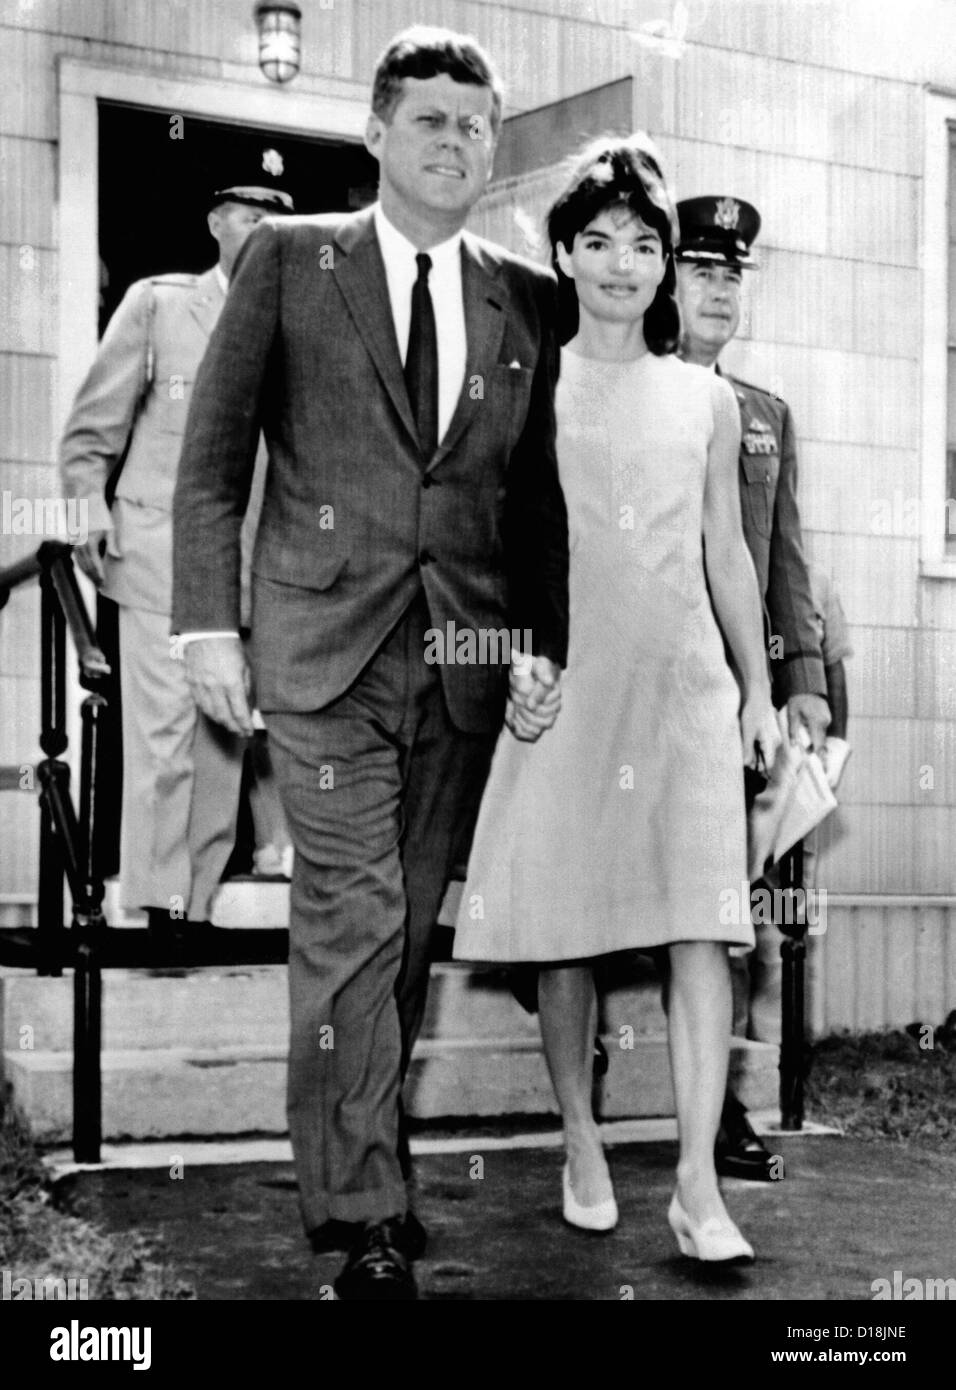 President and Jacqueline Kennedy walk hand-in-hand after the death of their infant son, Patrick Bouvier Kennedy. They are Stock Photo